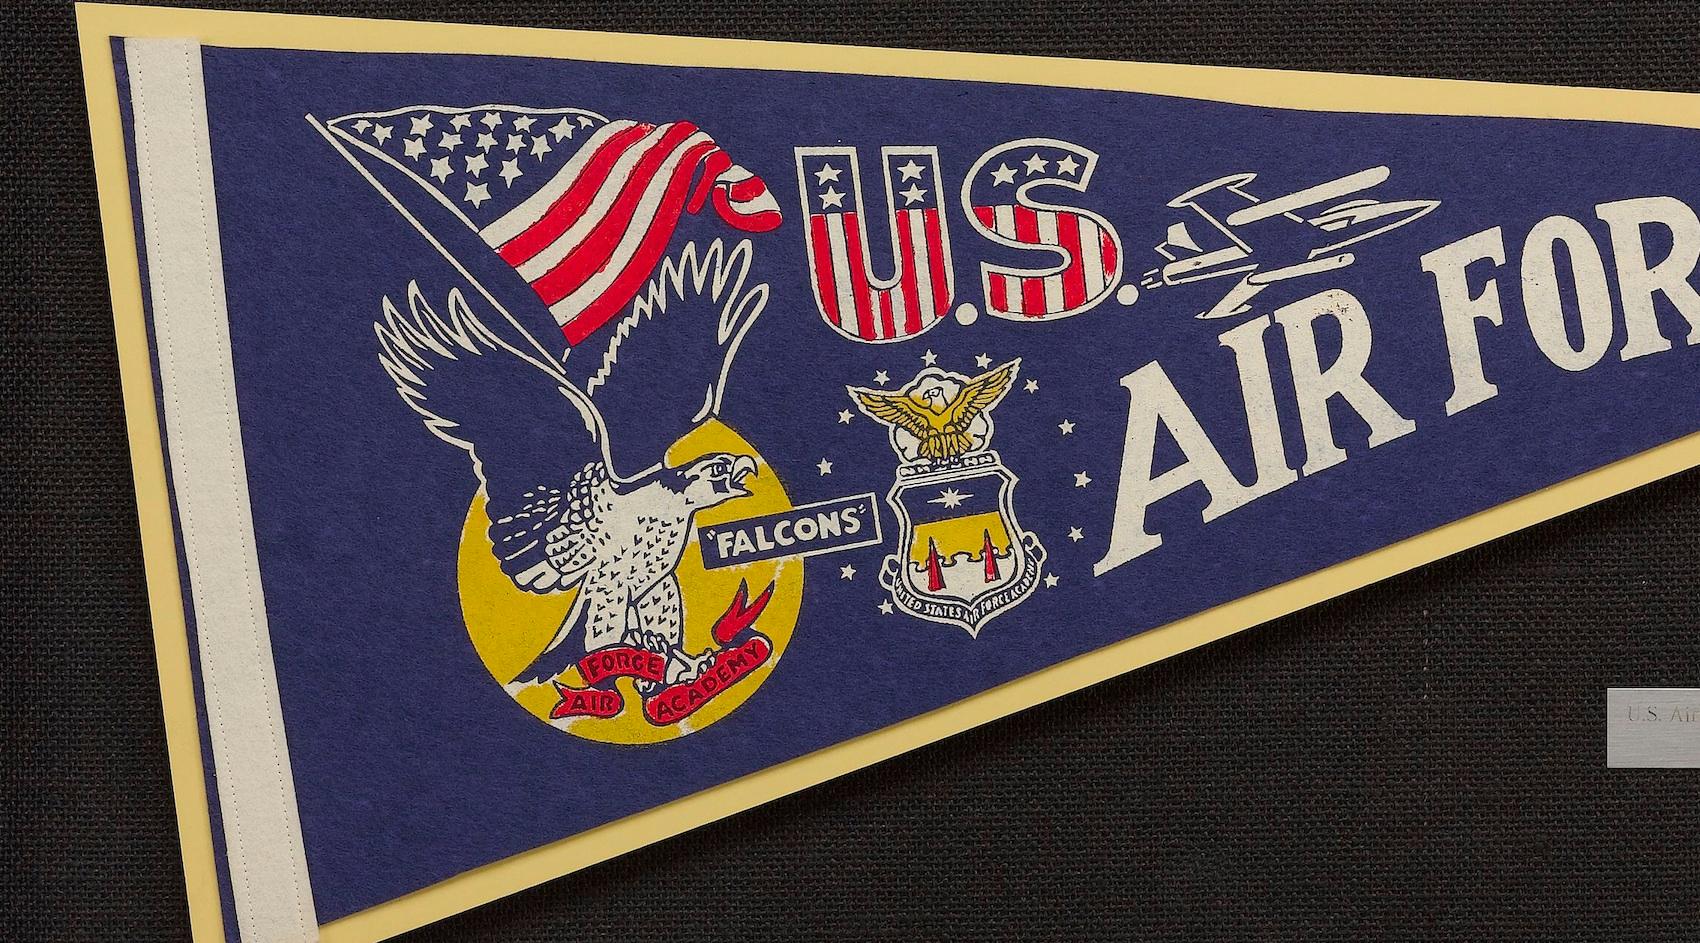 This vintage Air Force Academy pennant dates to the 1960s. The felt pennant has a blue background with a white headband. Decorated with the U.S. Flag pattern, the pennant has “U.S.” written just above the bold white “Air Force” with a depiction of